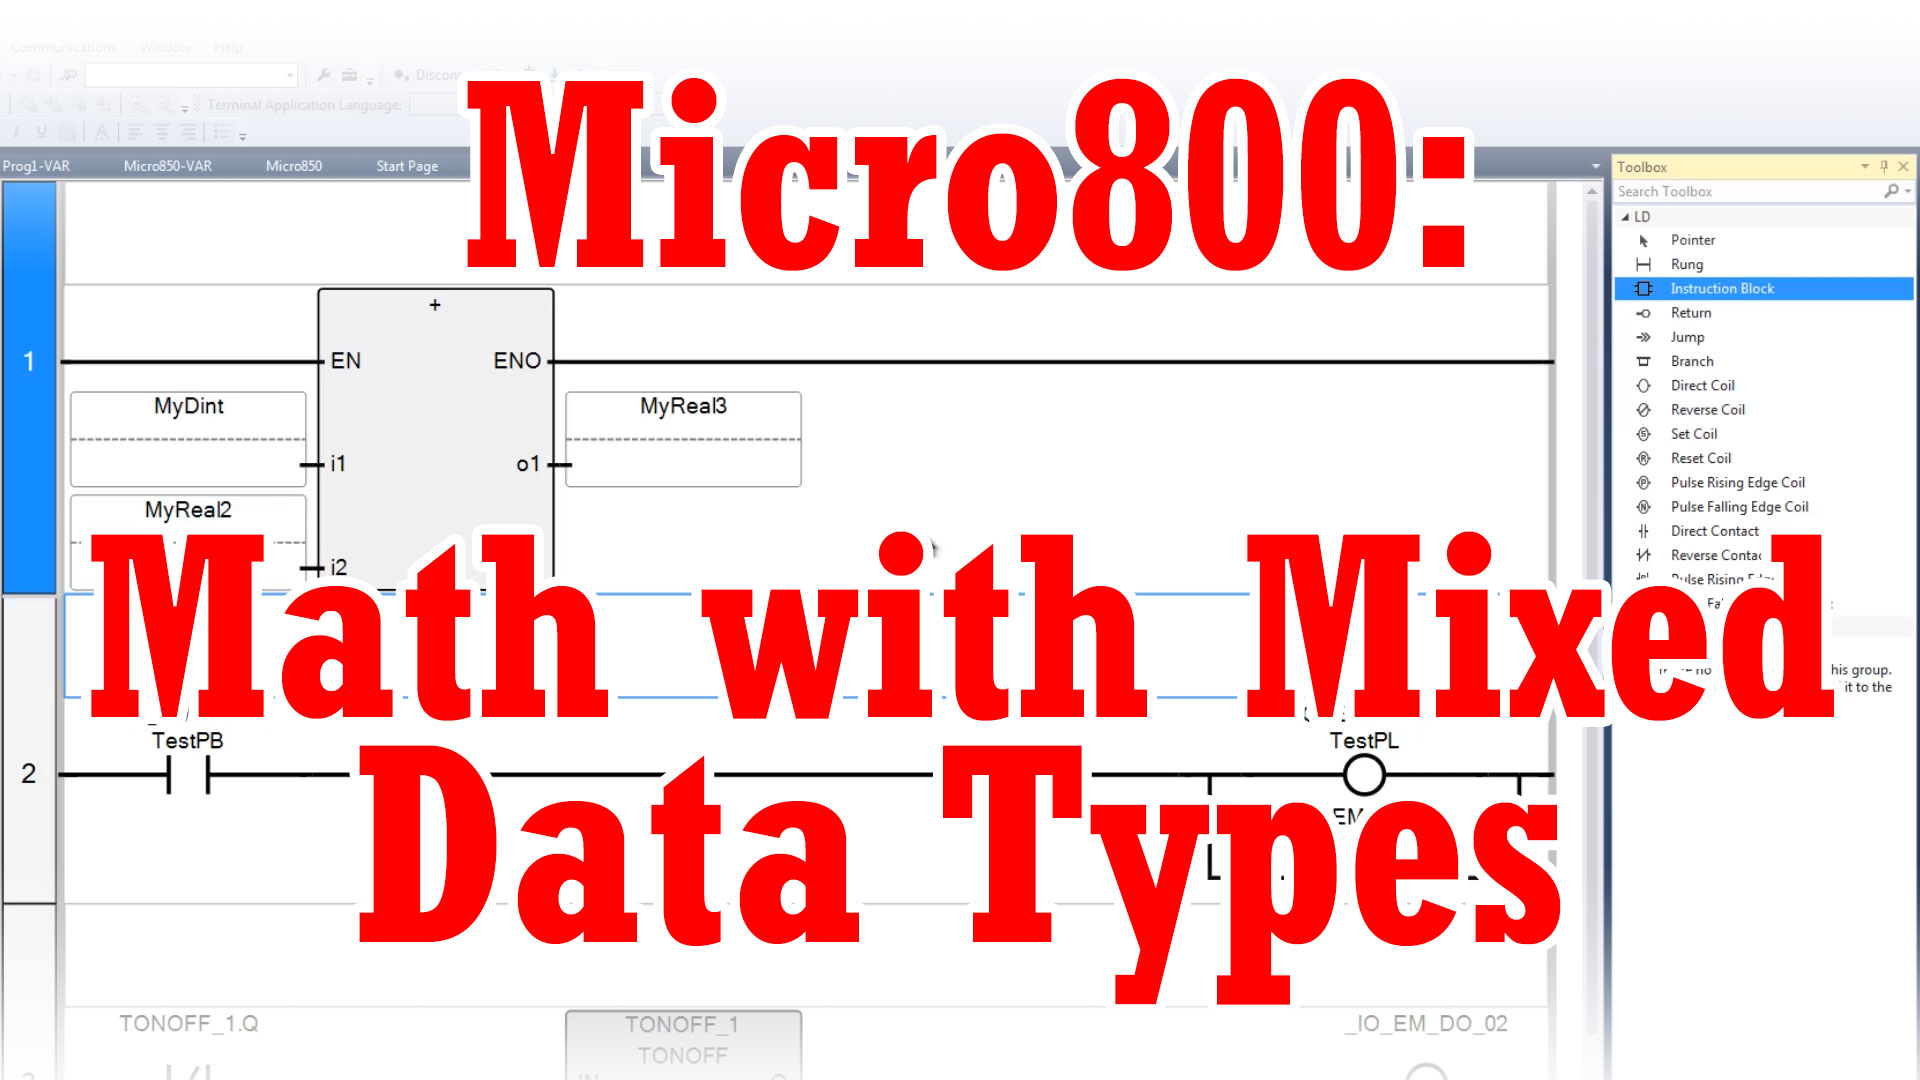 Micro800, CCW - Math with Mixed Data Types